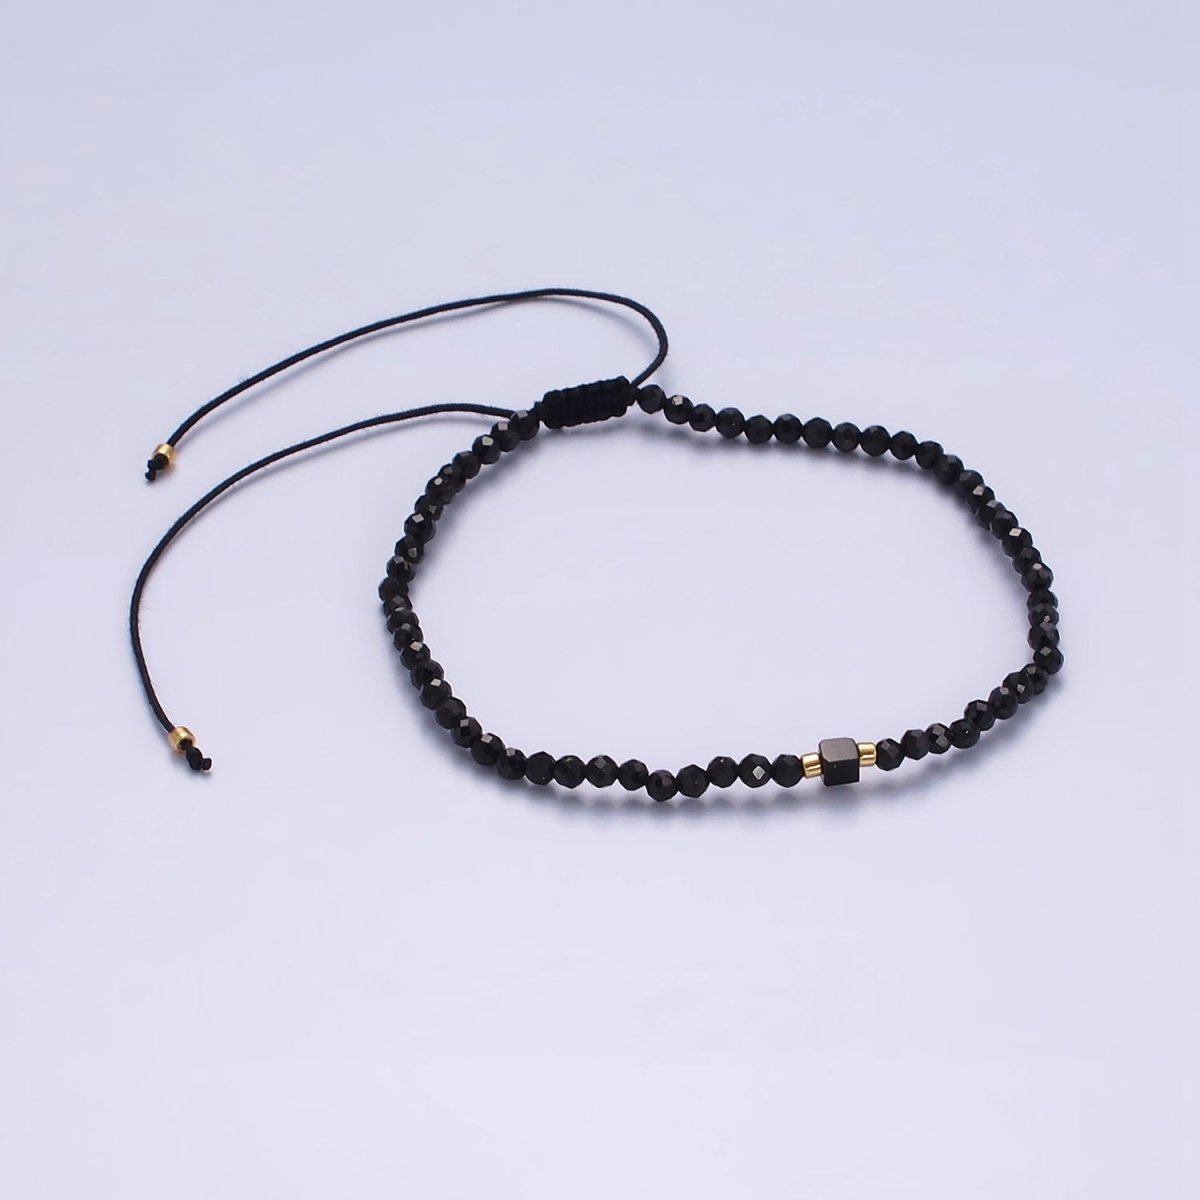 14K Gold Filled Onyx Multifaceted Black Rope Adjustable Friendship Bracelet | WA-2165 - WA-2167 Clearance Pricing - DLUXCA